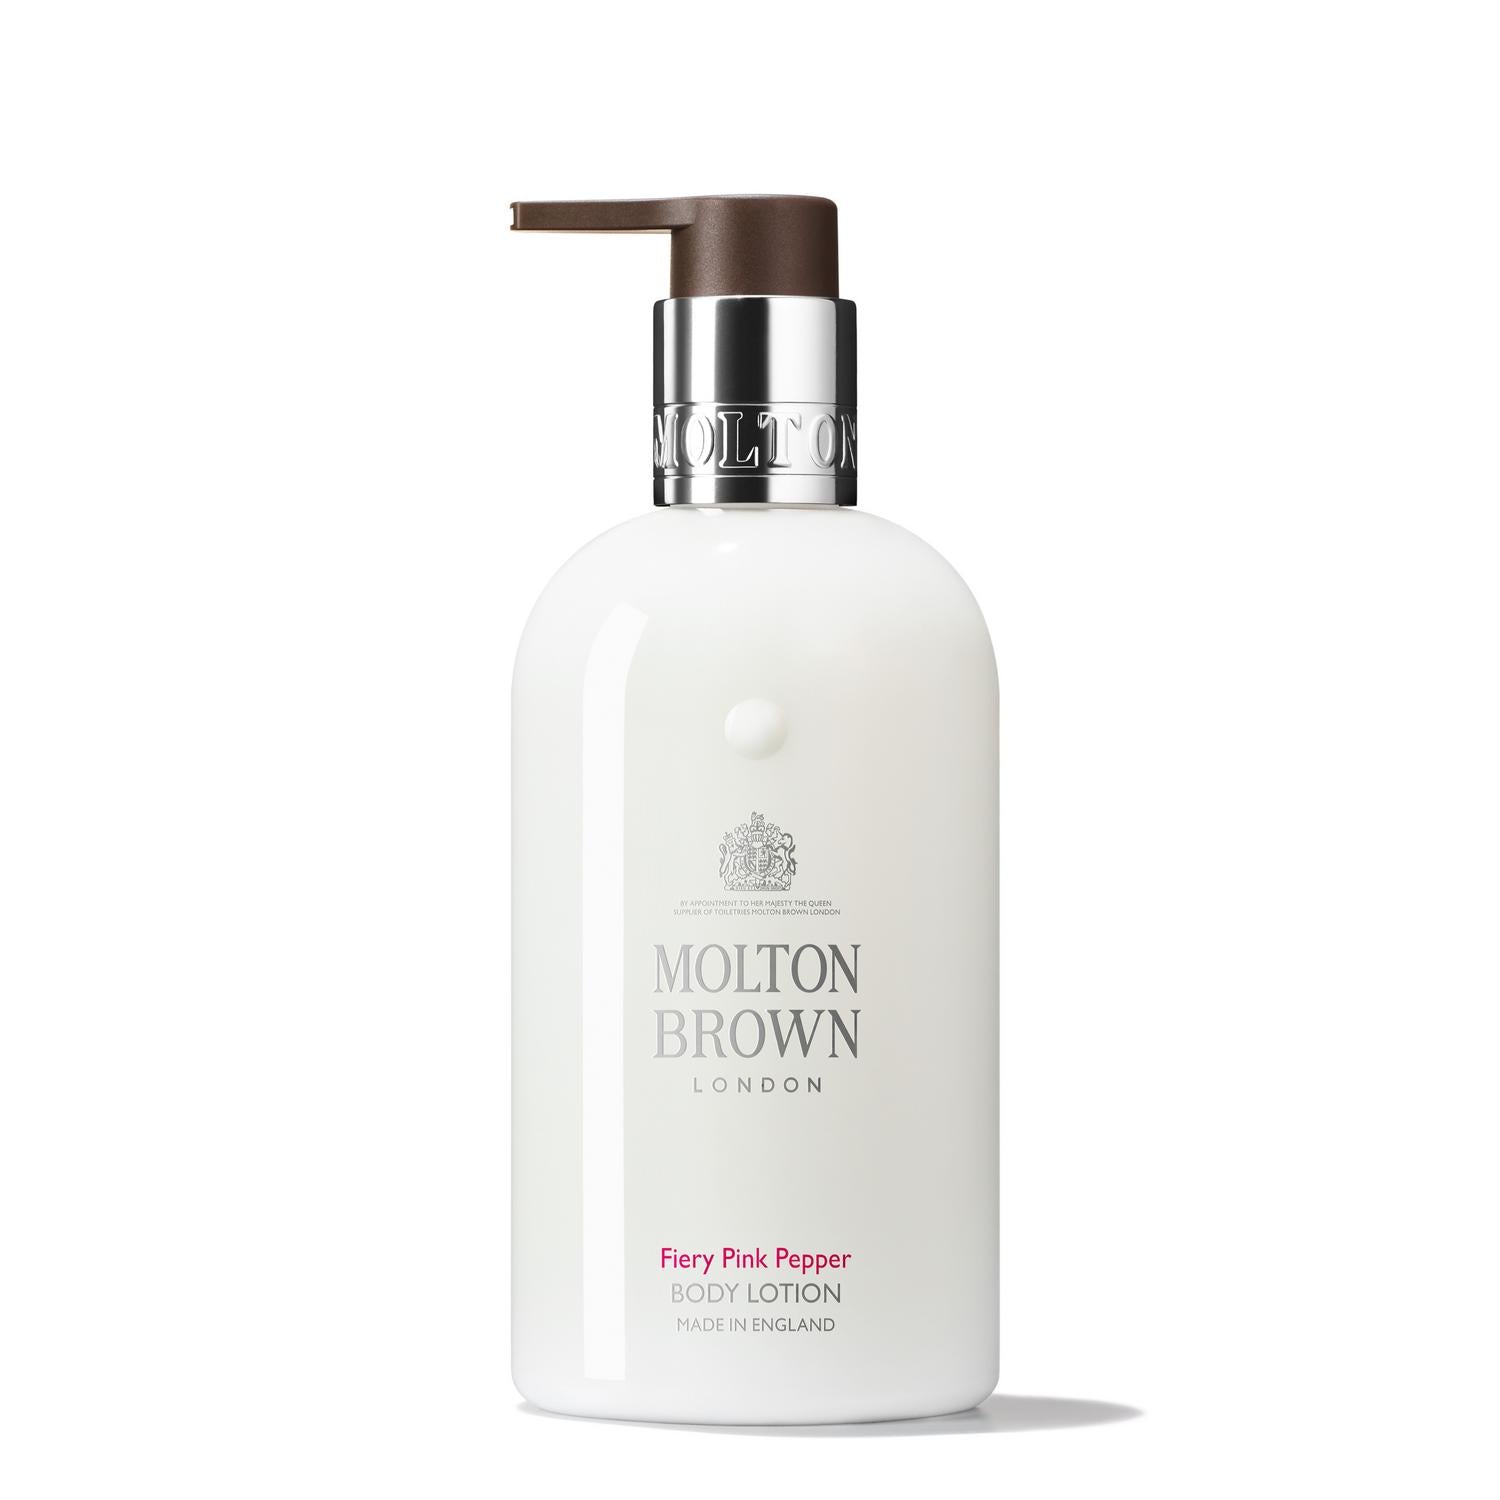 Molton Brown Fiery Pink Pepper Body Lotion - 300ml